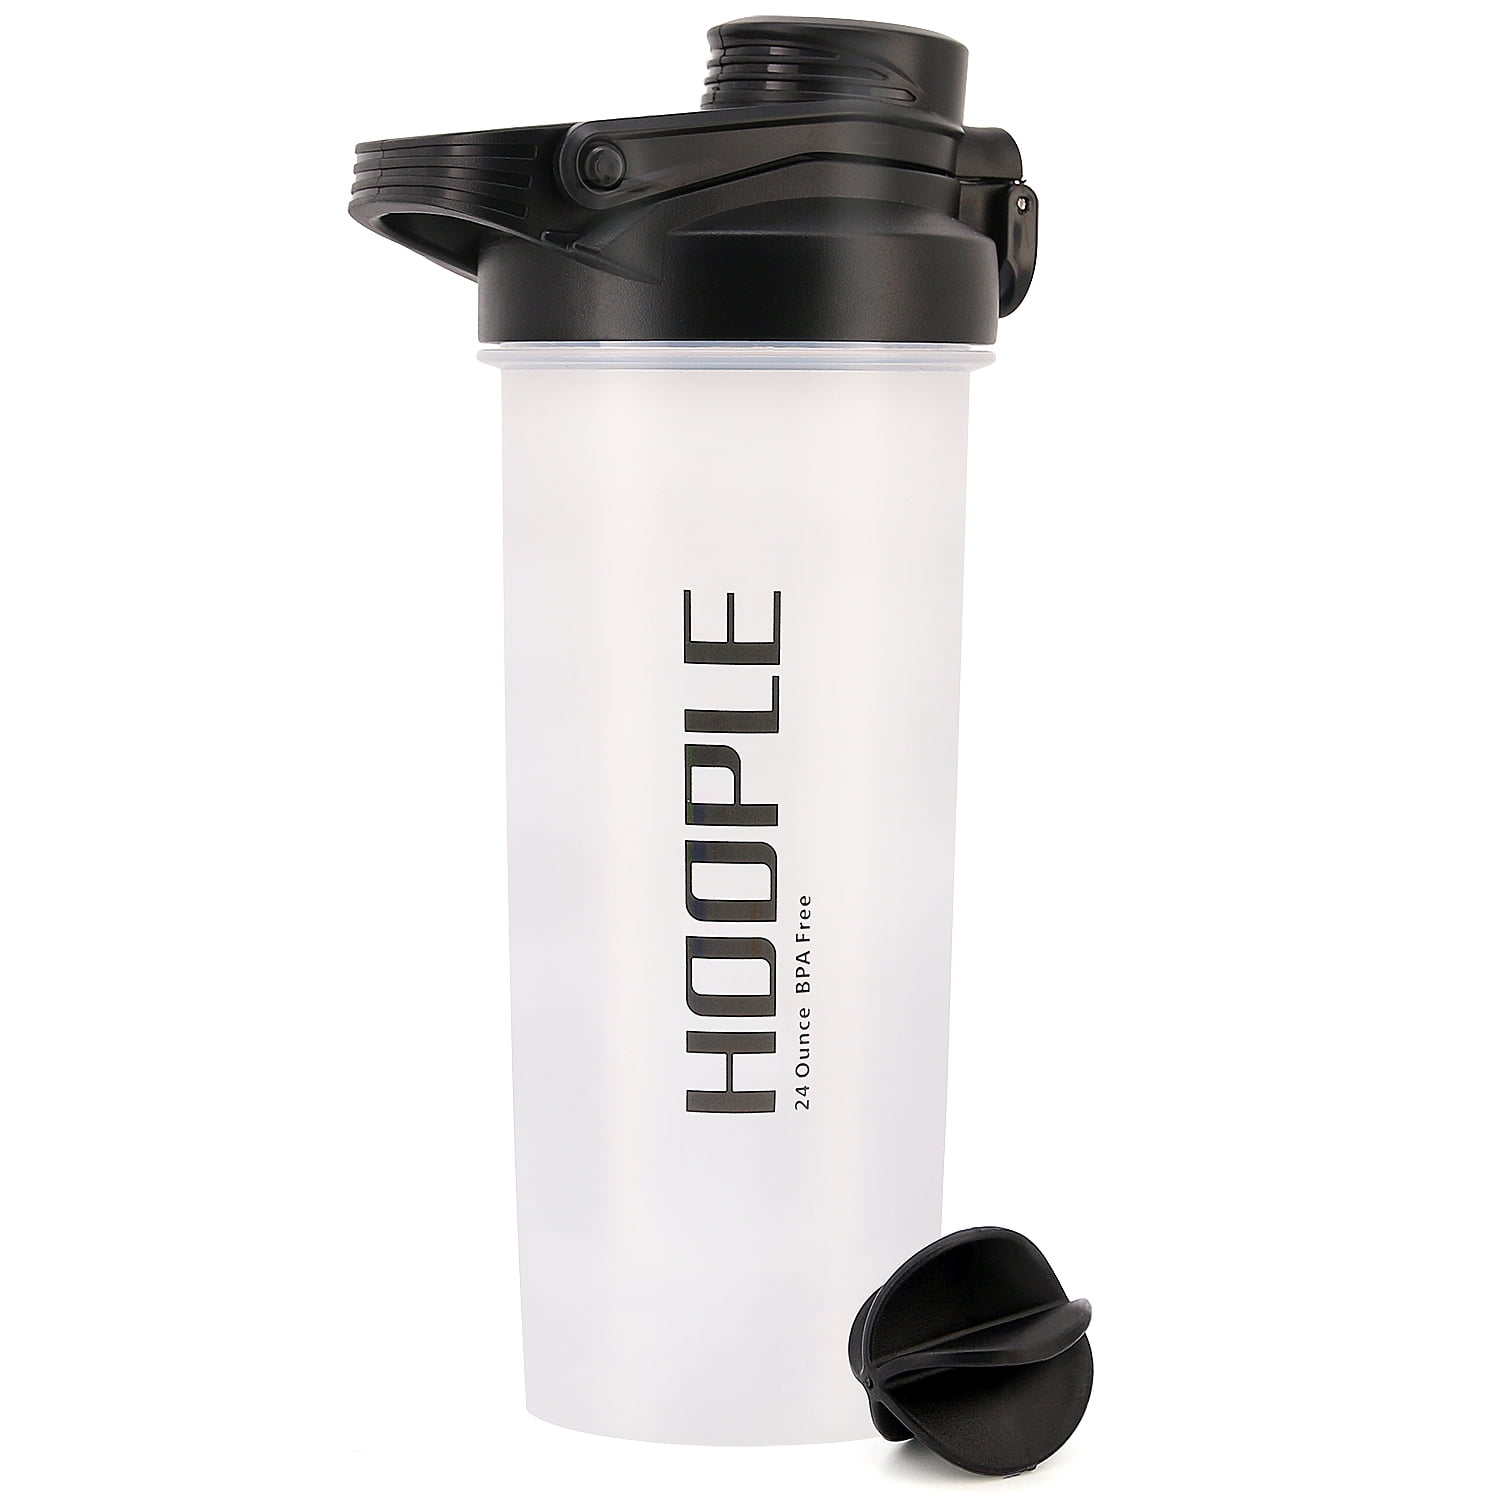 Protein Shaker Bottle, Gym Sports Water Bottle, Smoothie Mixer Cups, BPA Free, Flip with Powerful Blending Included, 24-Ounce - Walmart.com